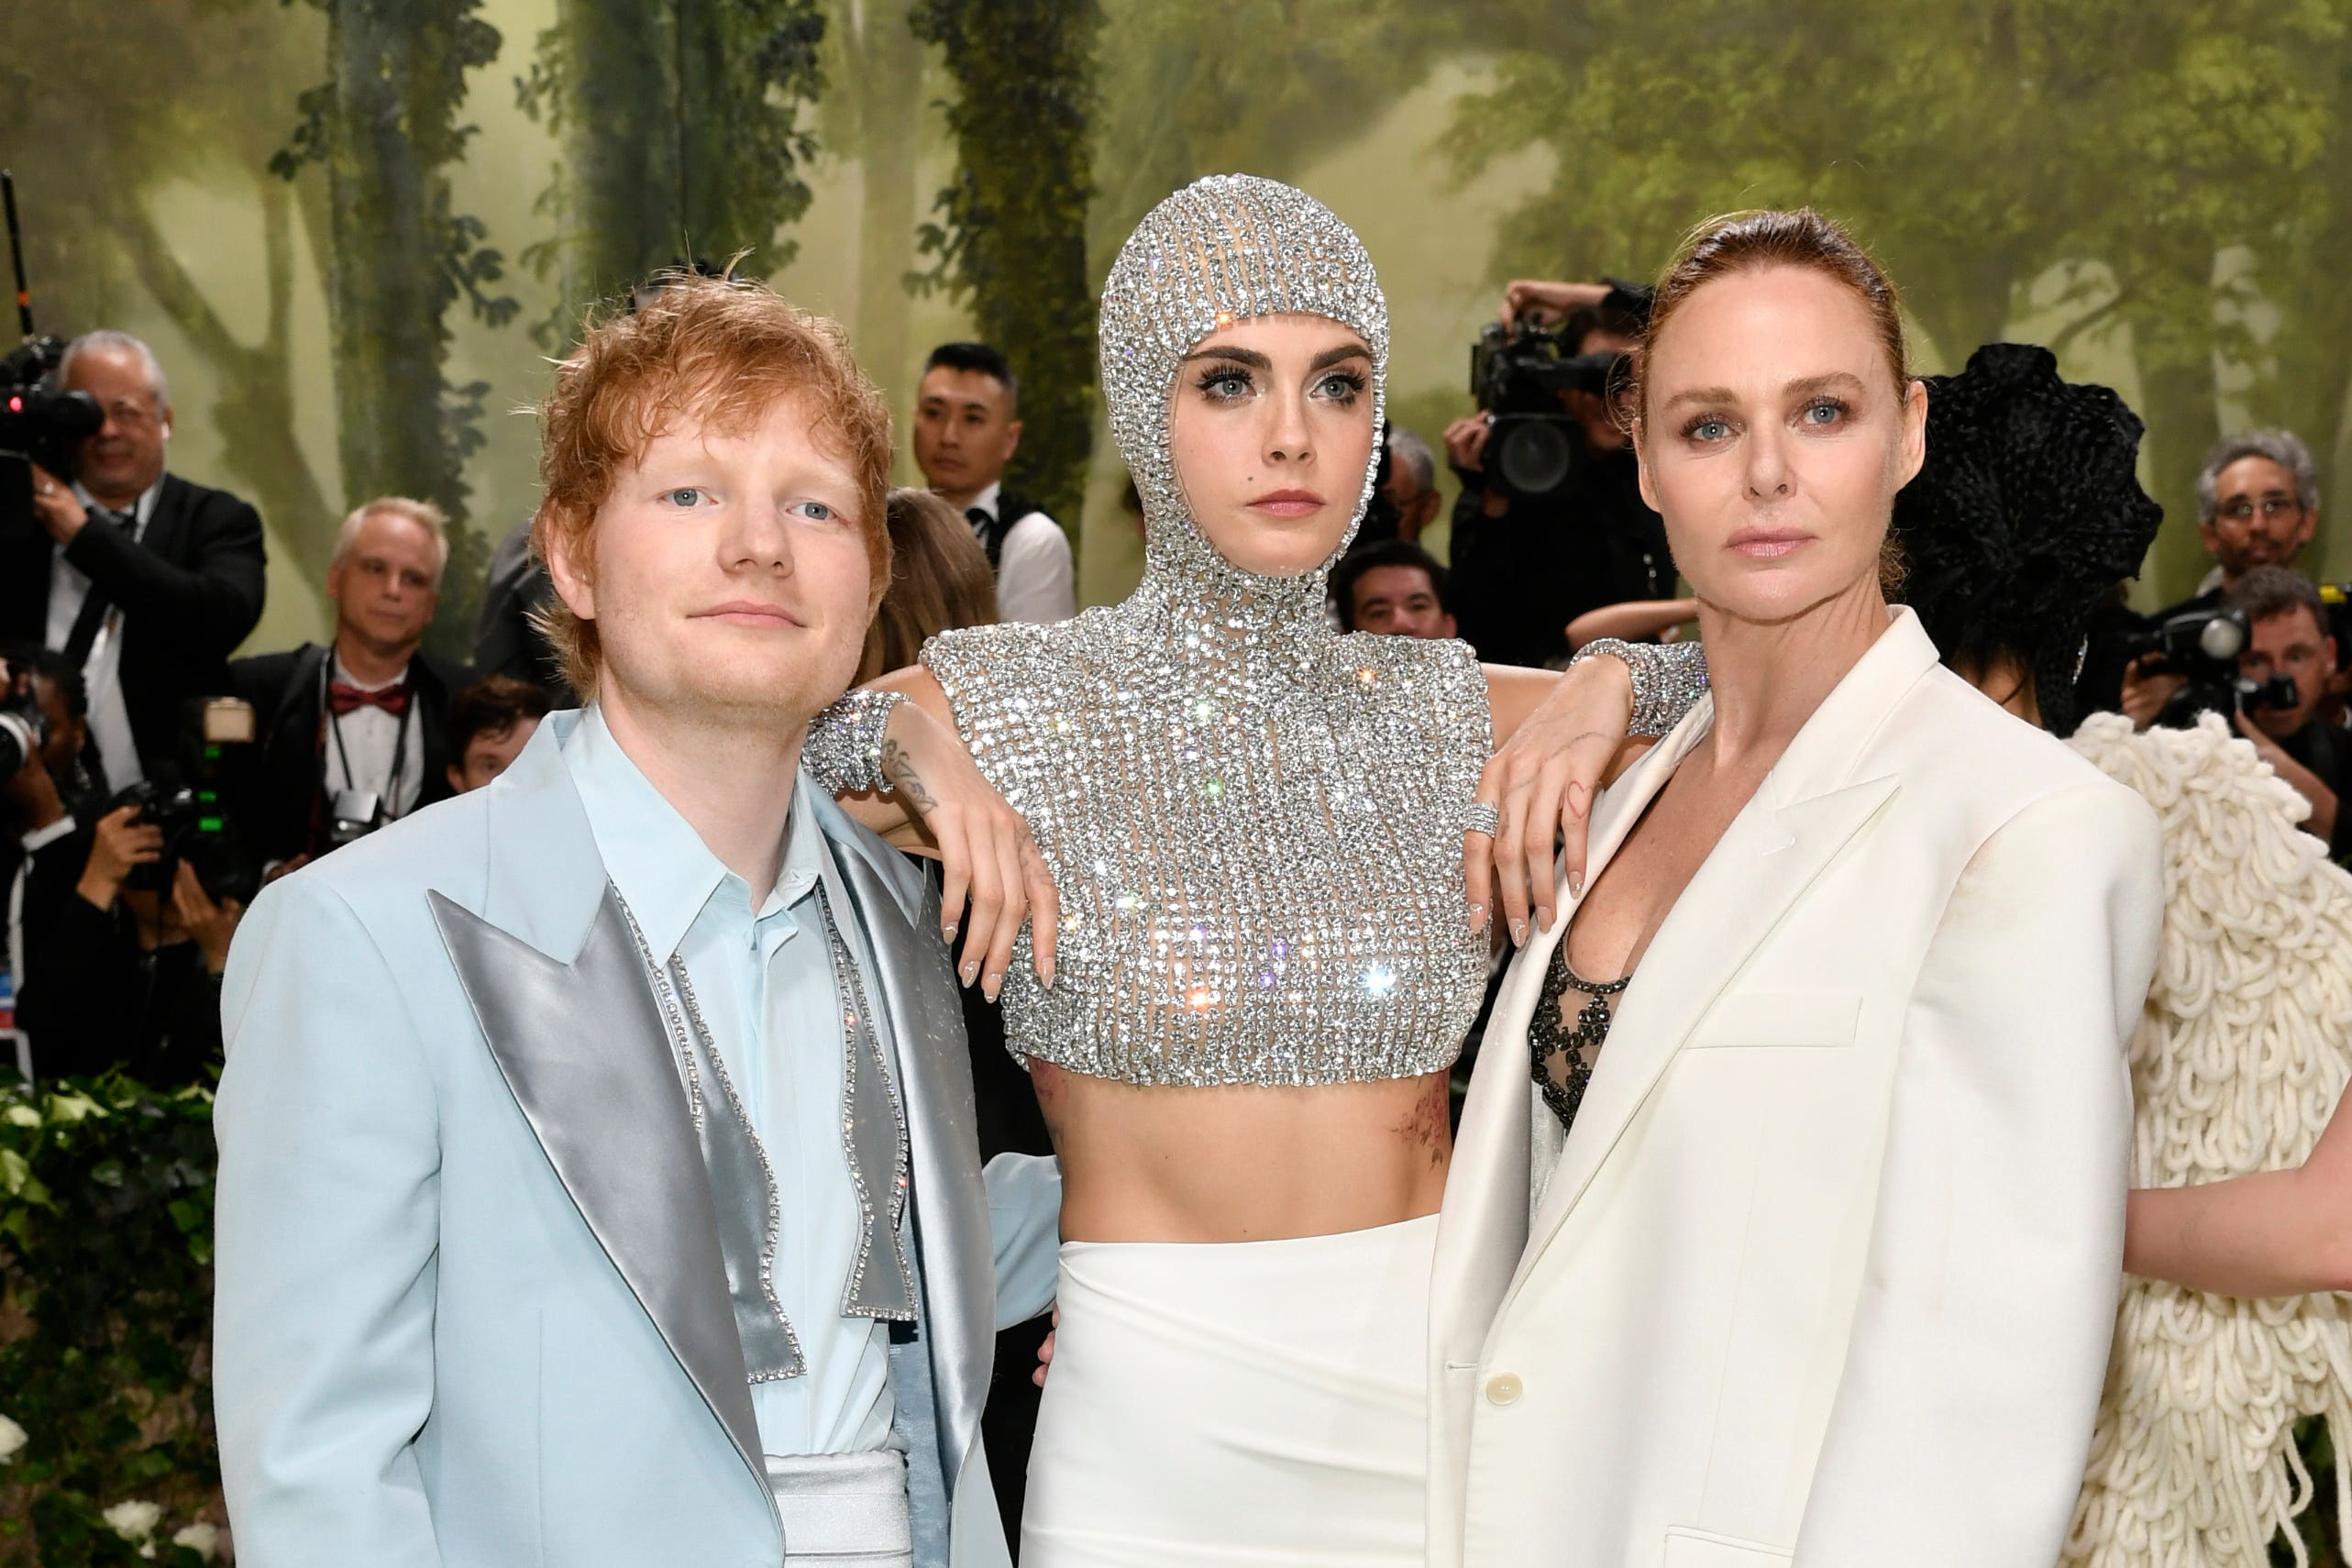 cara delevingne hits back at trolls after cruel claims the star was ‘coked up’ during met gala interview